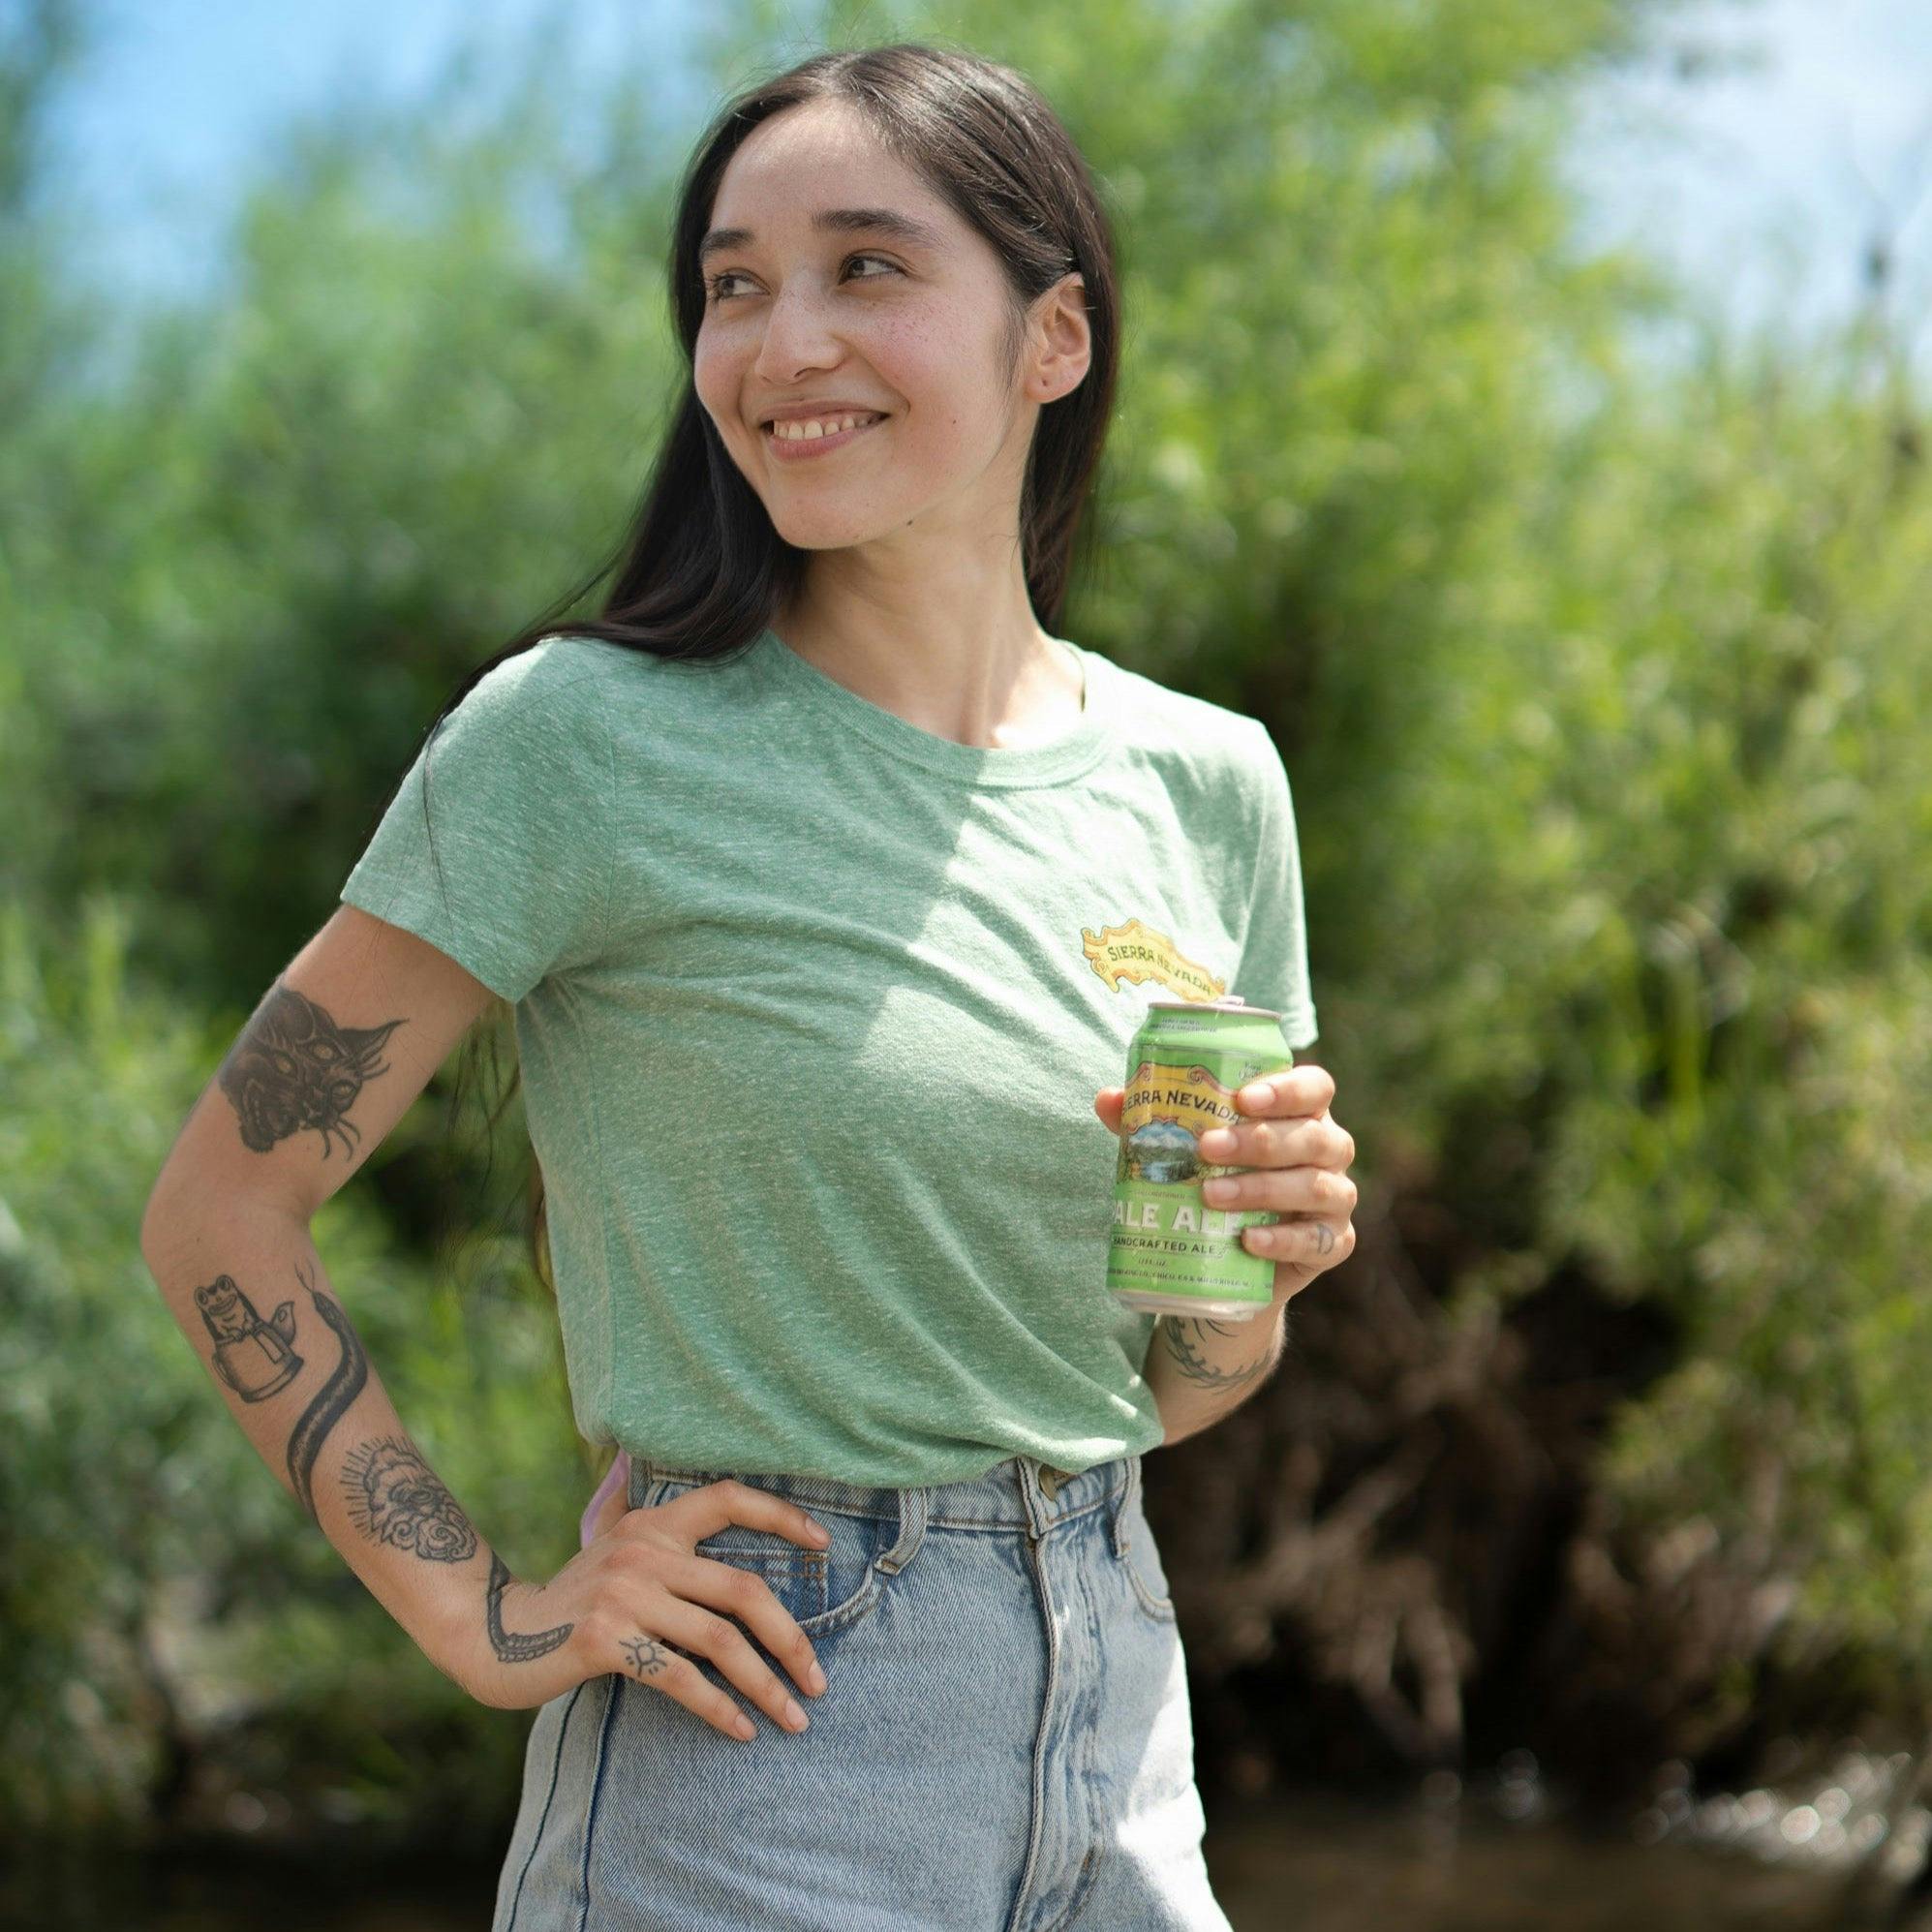 Sierra Nevada Brewing Co. Women's Pale Ale T-Shirt worn by a woman standing on the bank of a river enjoying a Pale Ale